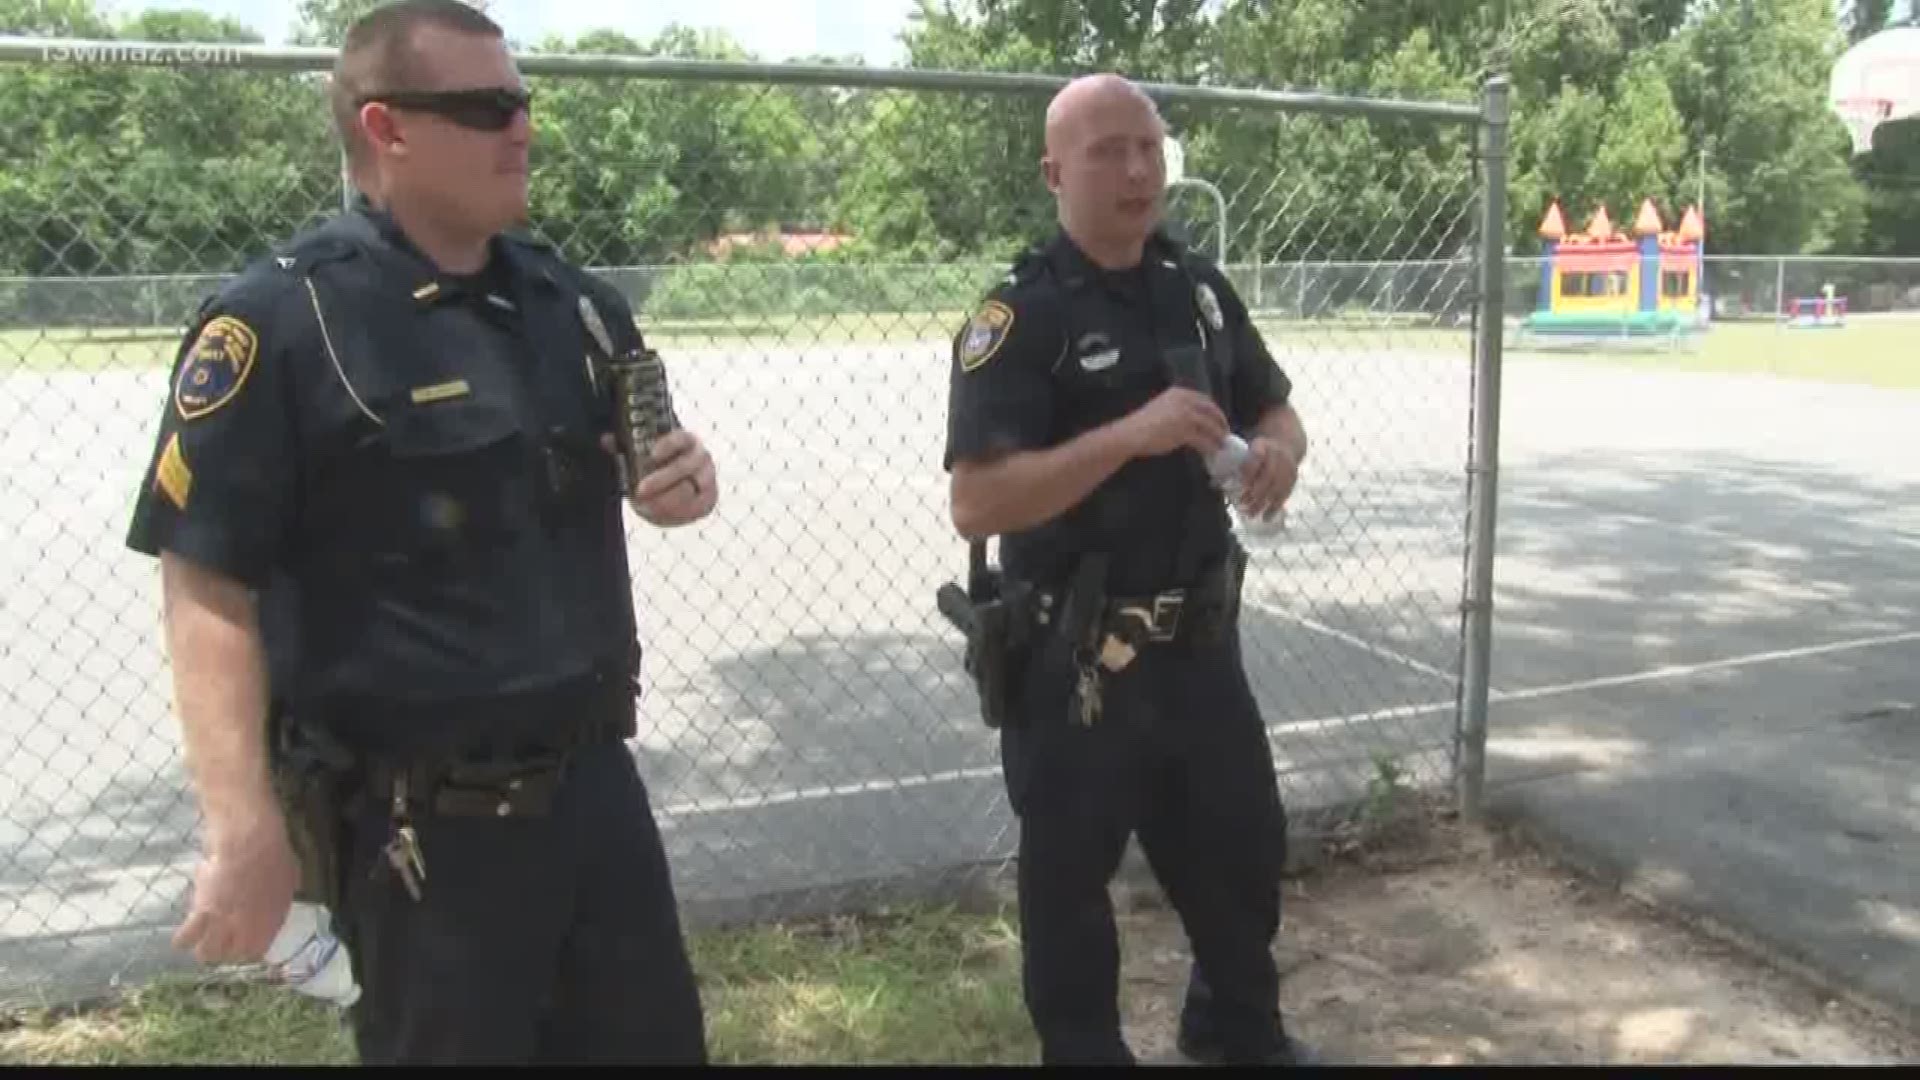 The sixth annual 'Unity in the Community' fun festival was hosted by the Houston County NAACP in Deloris Toliver Park on Saturday. It's a chance for people to meet and greet law enforcement.